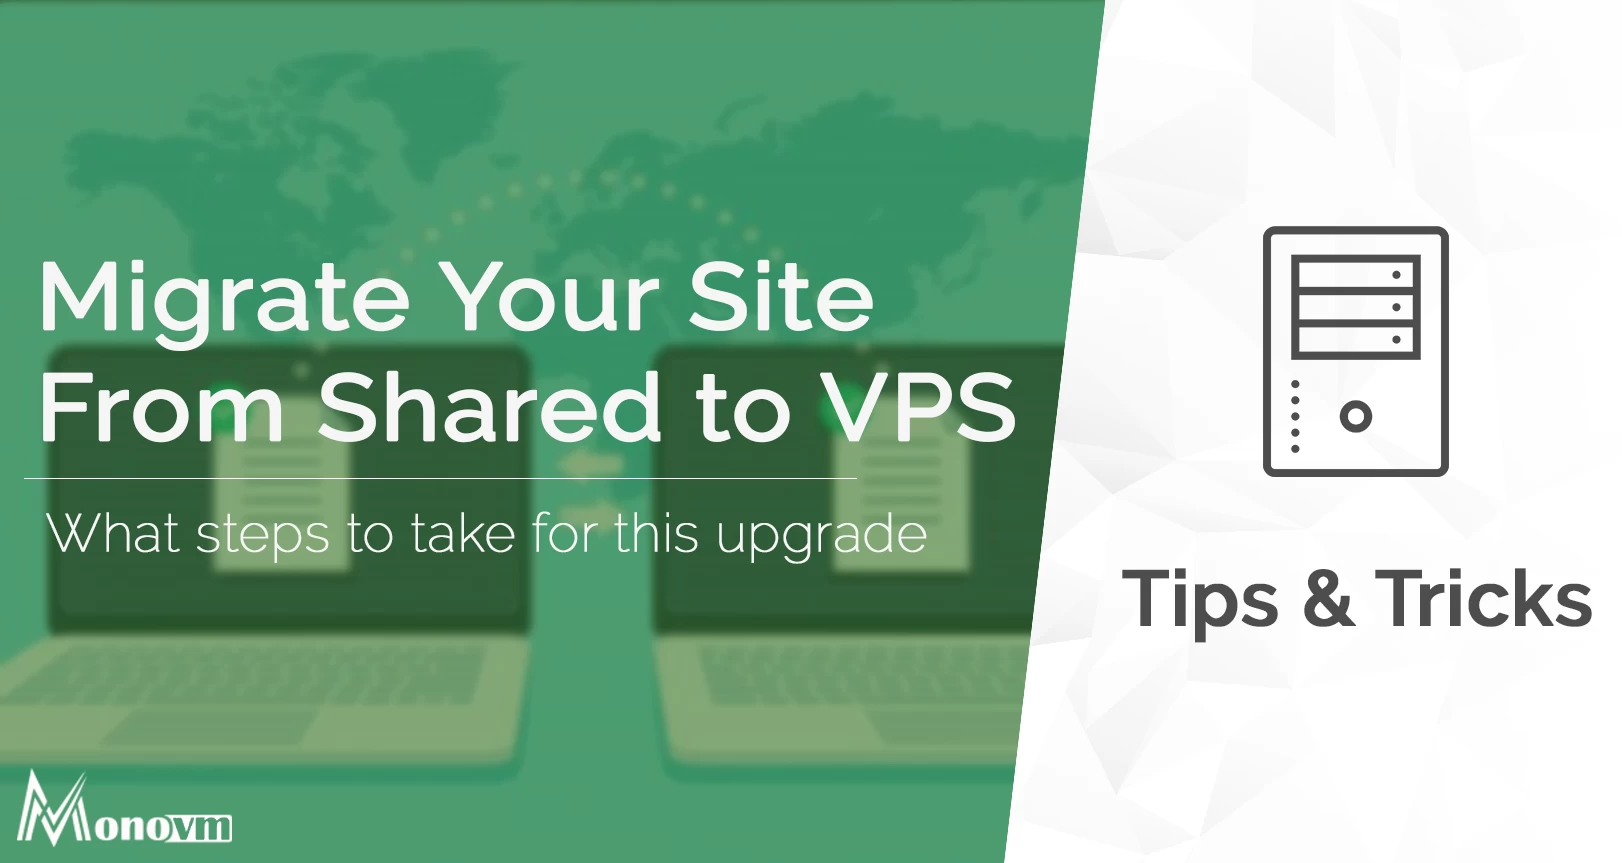 How to Migrate a Website from Shared Hosting to VPS?